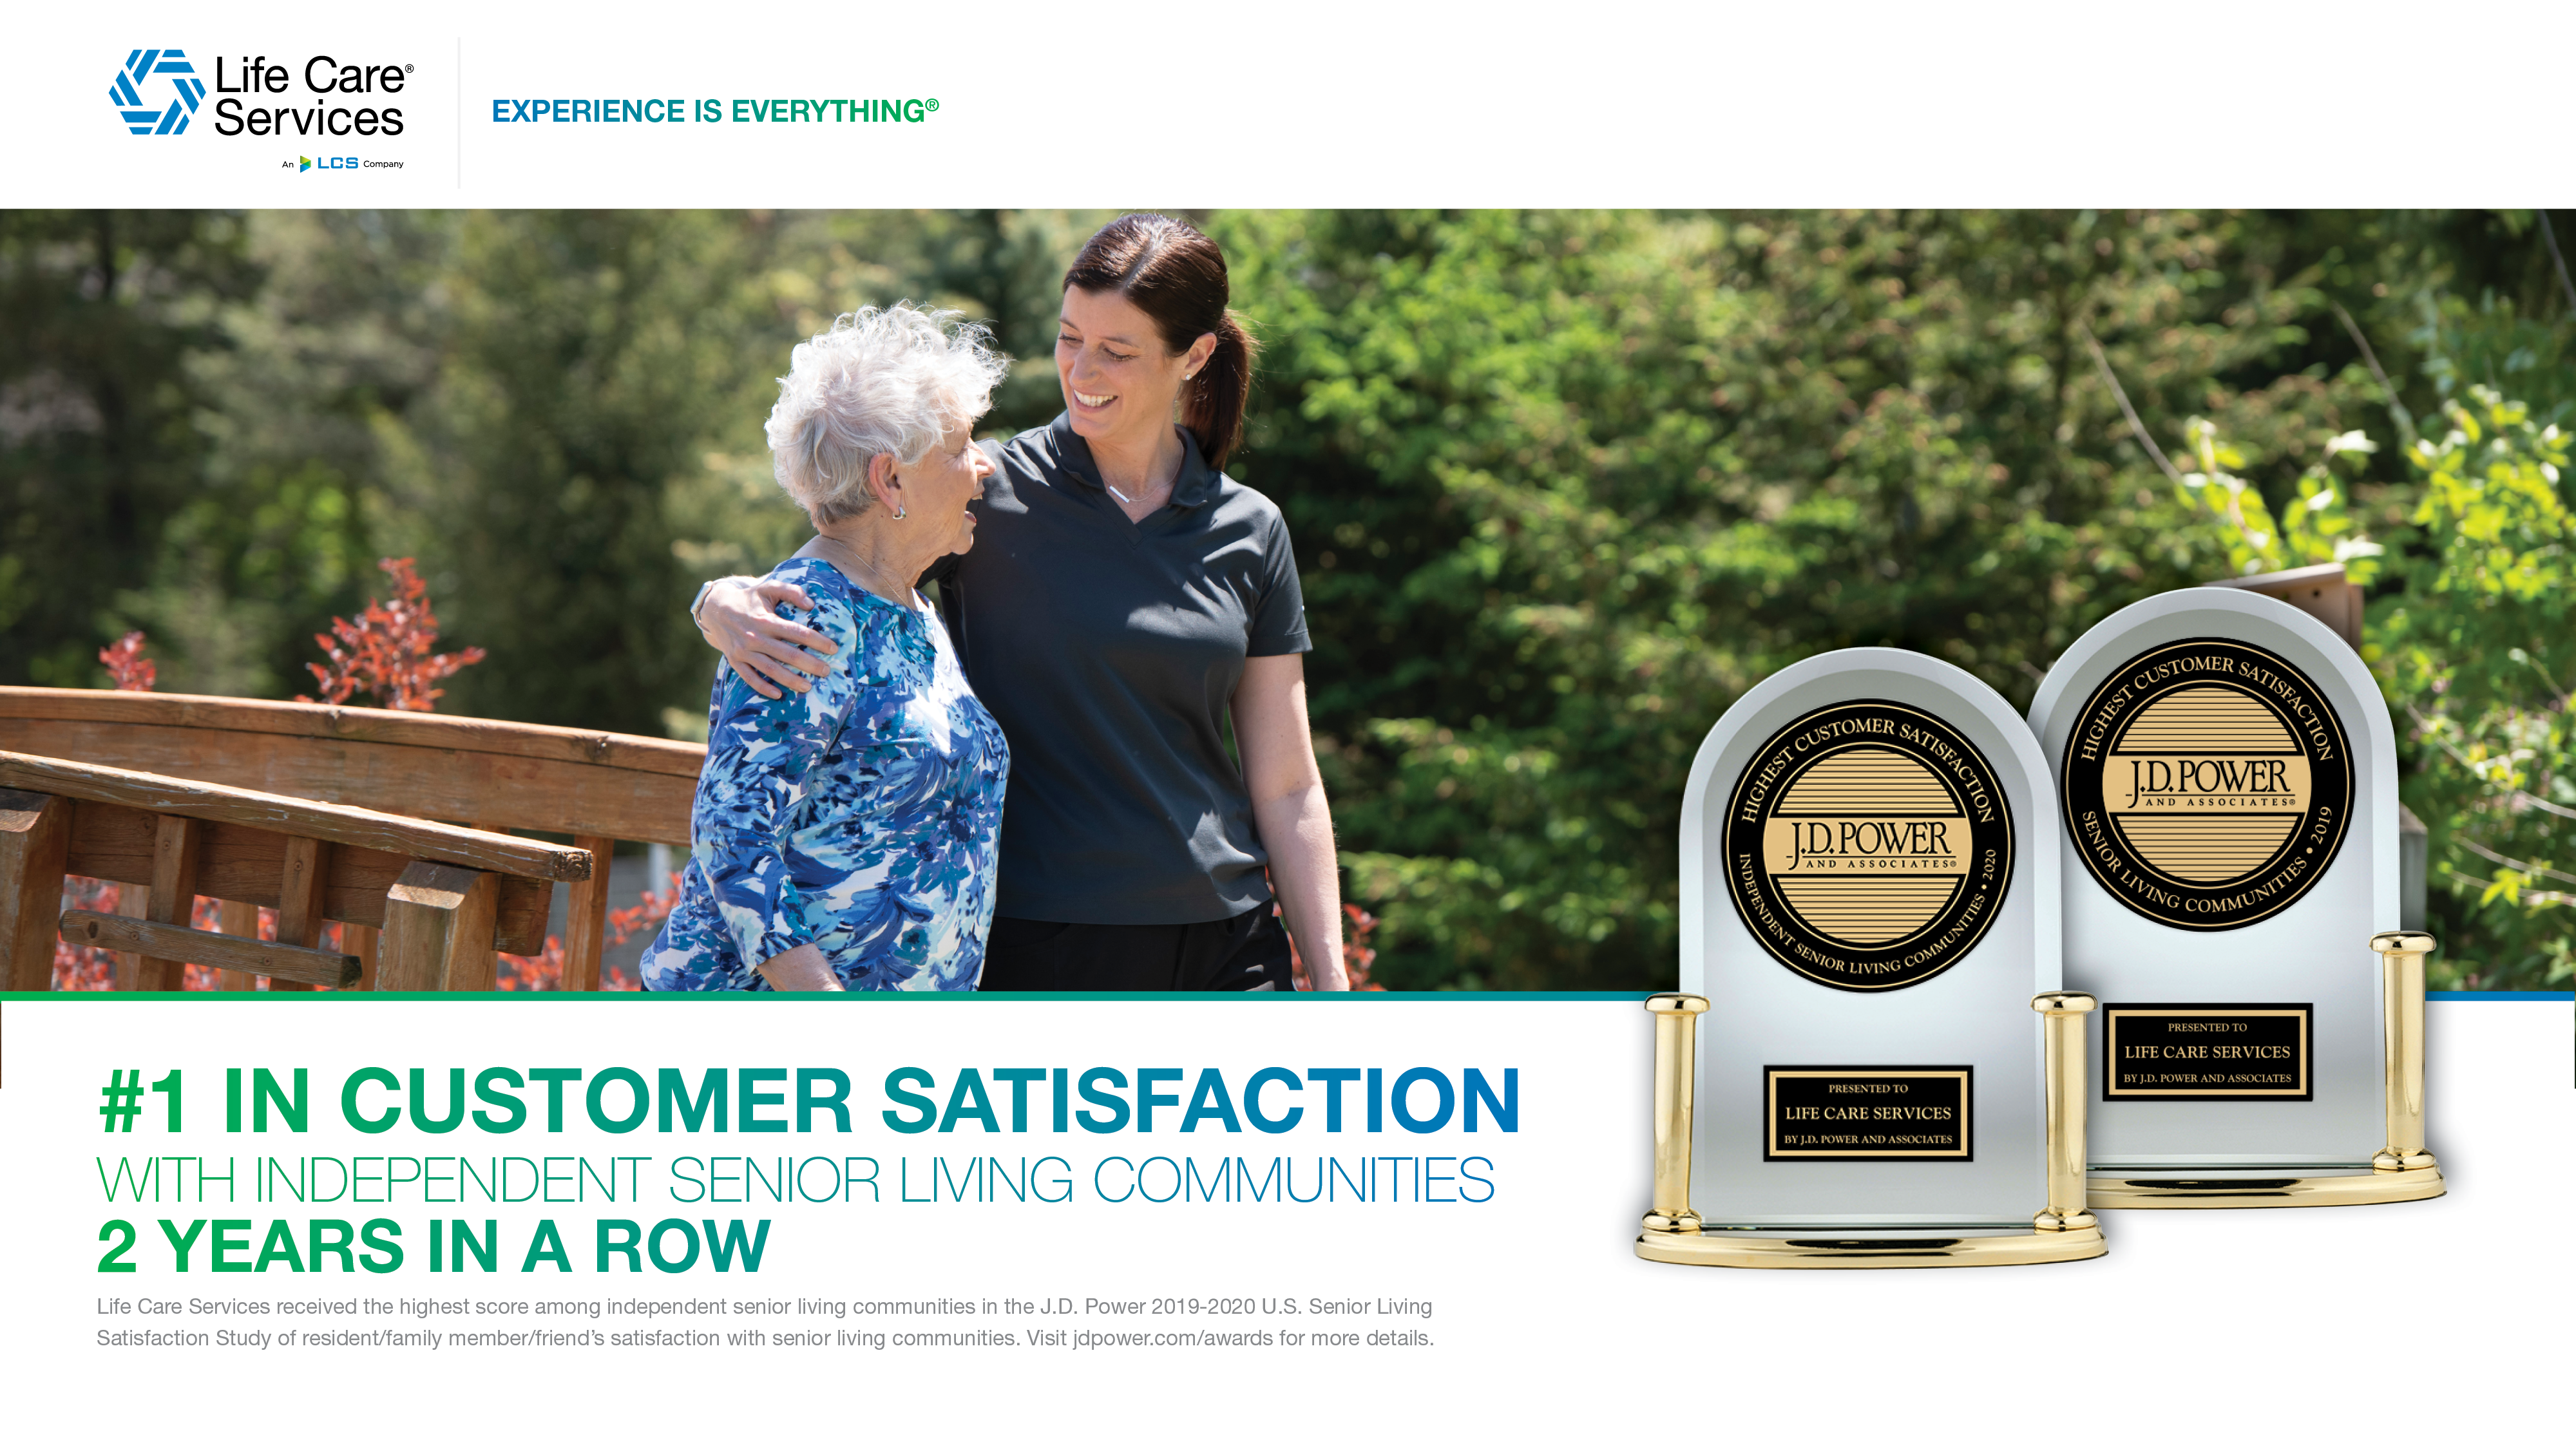 Life Care Services J.D. Power Award, #1 in customer satisfaction with independent senior living communities 2 years in a row